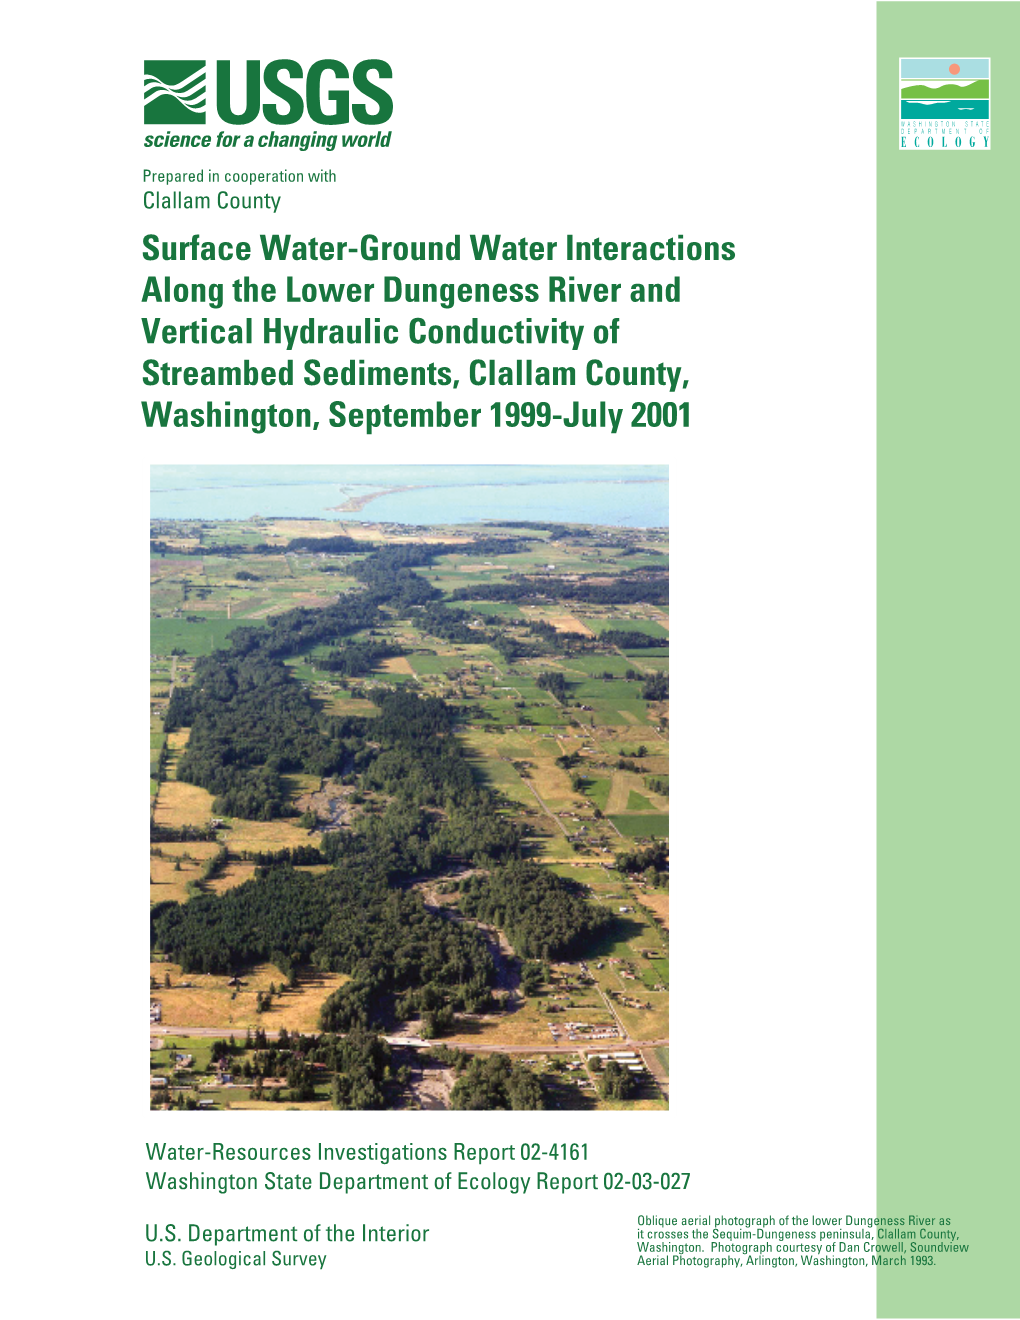 Surface Water-Ground Water Interactions Along the Lower Dungeness River and Vertical Hydraulic Conductivity of Streambed Sedimen